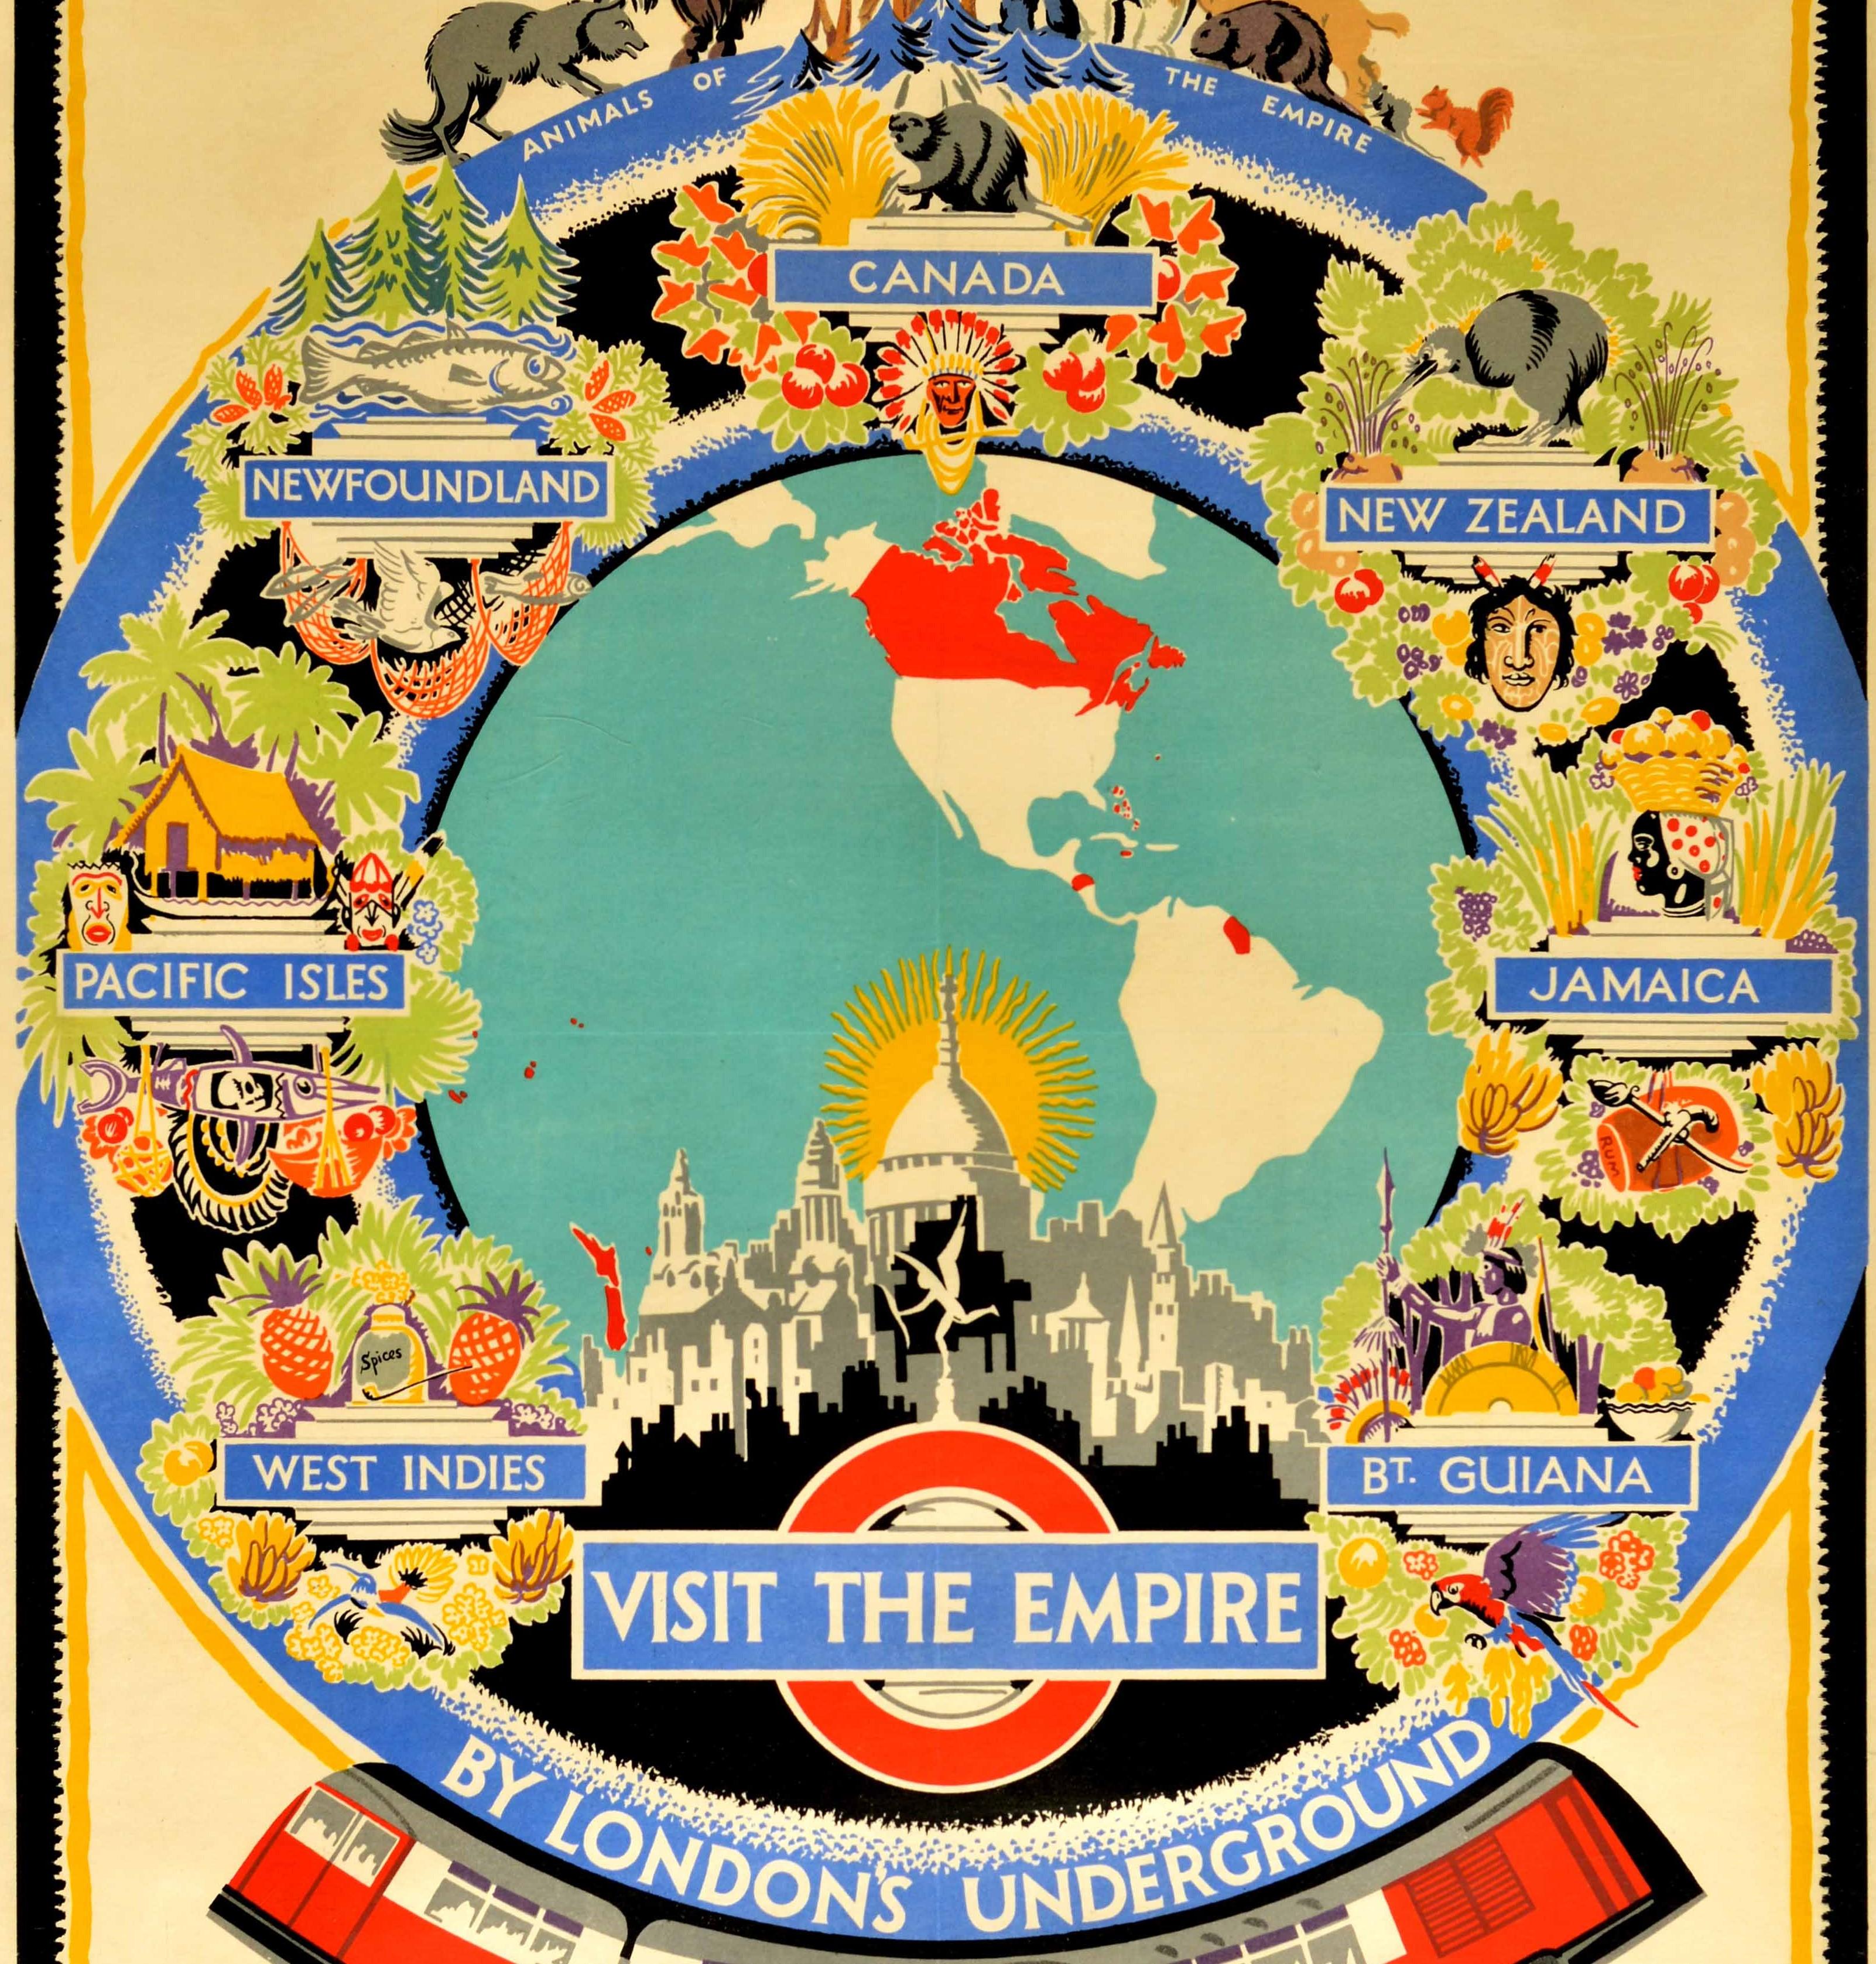 Original vintage London Transport travel advertising poster - Visit the Empire By London's Underground The Wealth Romance and Beauty of the Empire - featuring a colourful design by Ernest Michael Dinkel (1894-1983) showing a map marking the British